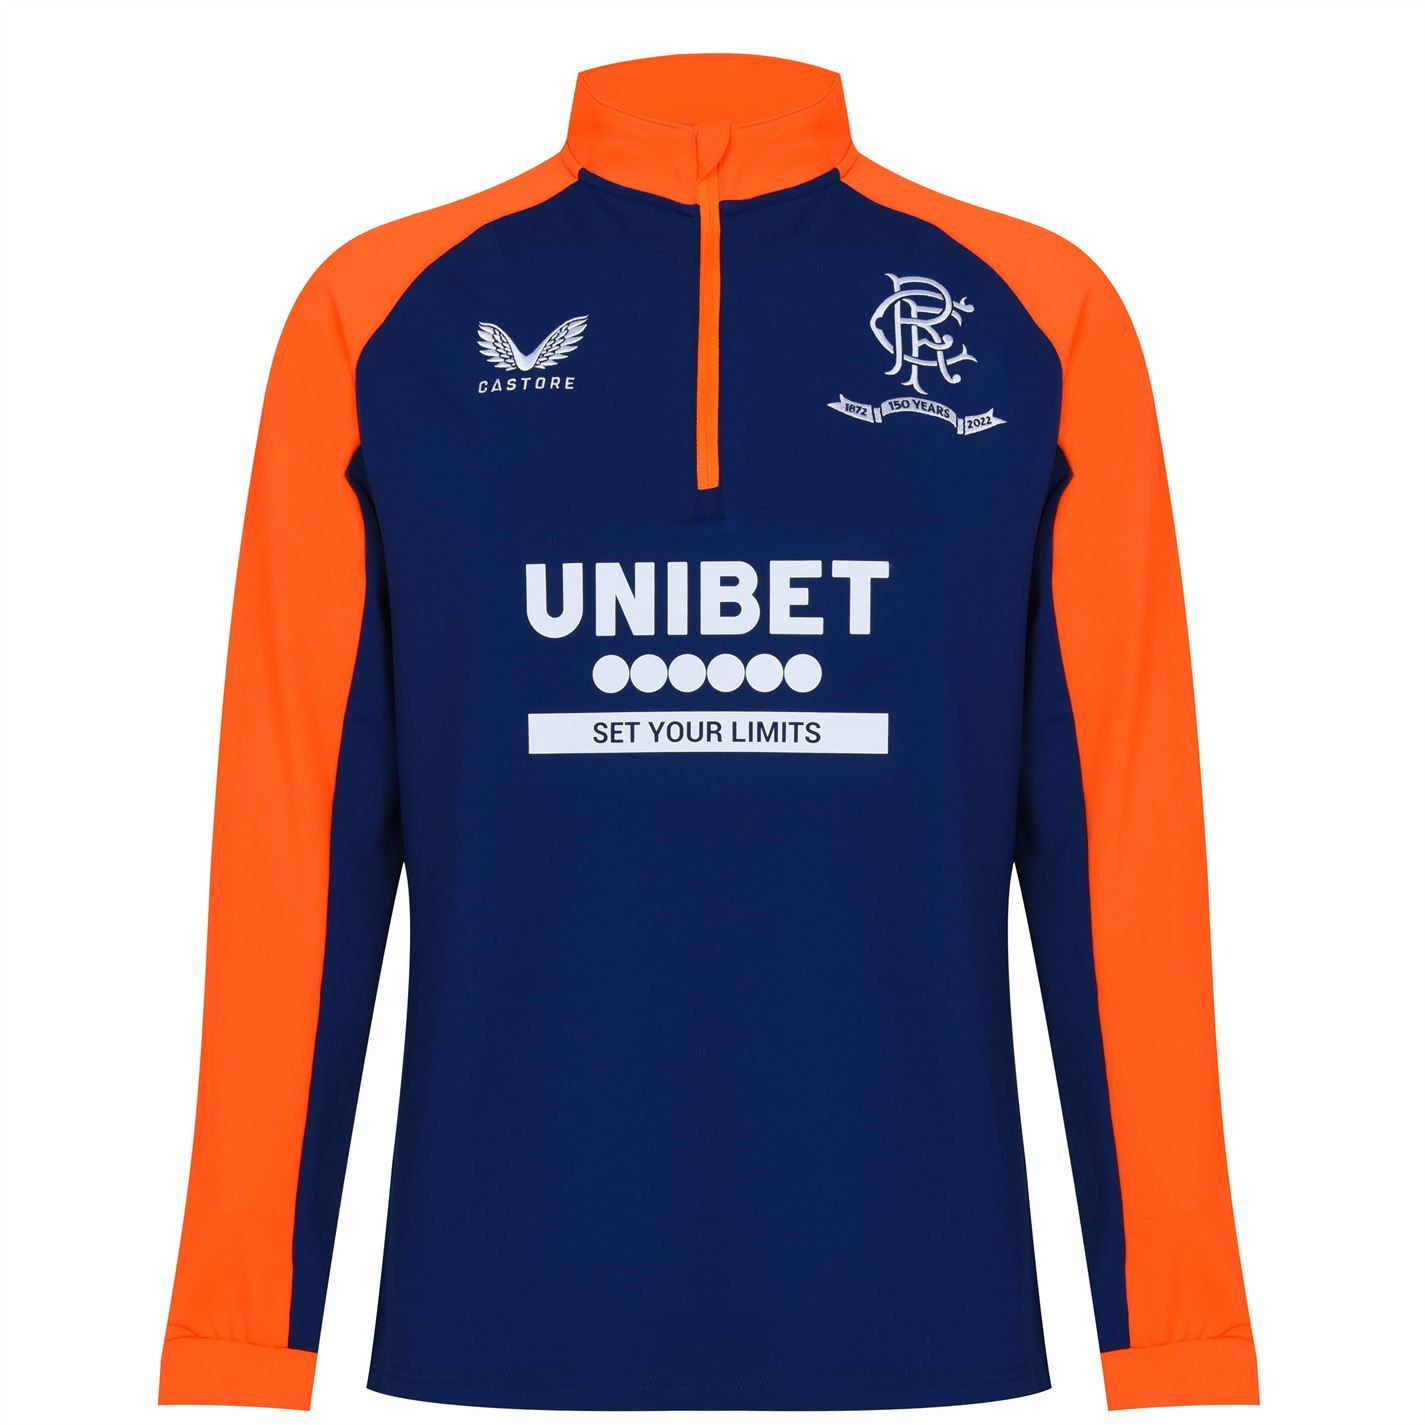 This Rangers Training Top by Castore has been crafted with high flex fabric which also wicks moisture away from the skin to ensure you can move with incredible freedom as well as remaining highly comfortable. The quarter zip fastening allows you to adjust the ventilation and take off with ease when you've fully warmed up, while the team crest highlights your support for the Gers with pride and the Castore branding completes the design.